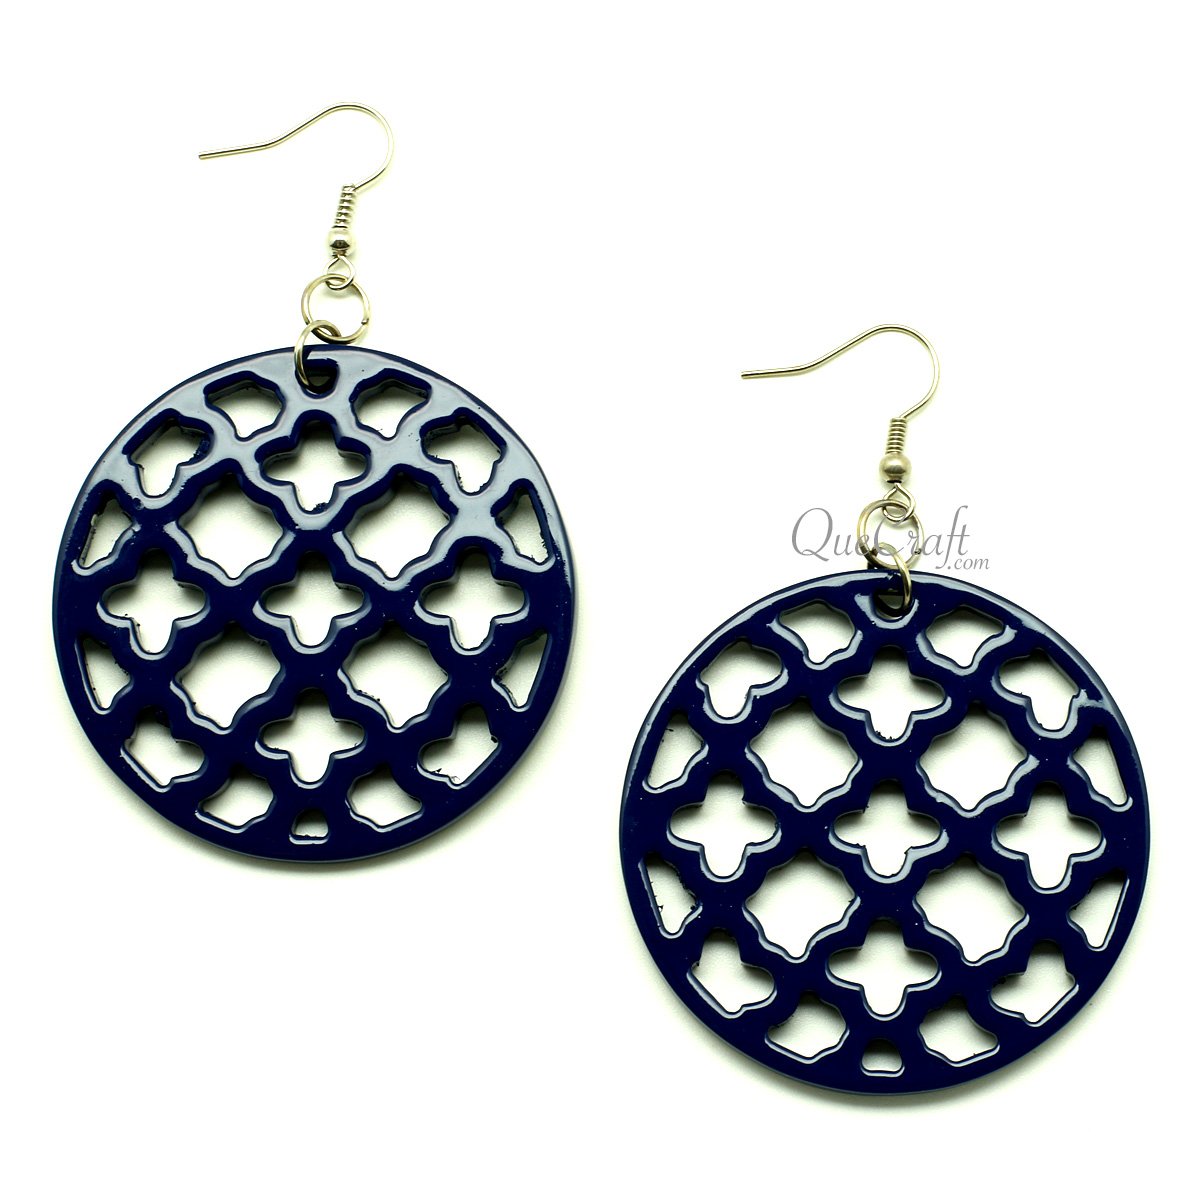 Horn & Lacquer Earrings #13252 - HORN JEWELRY